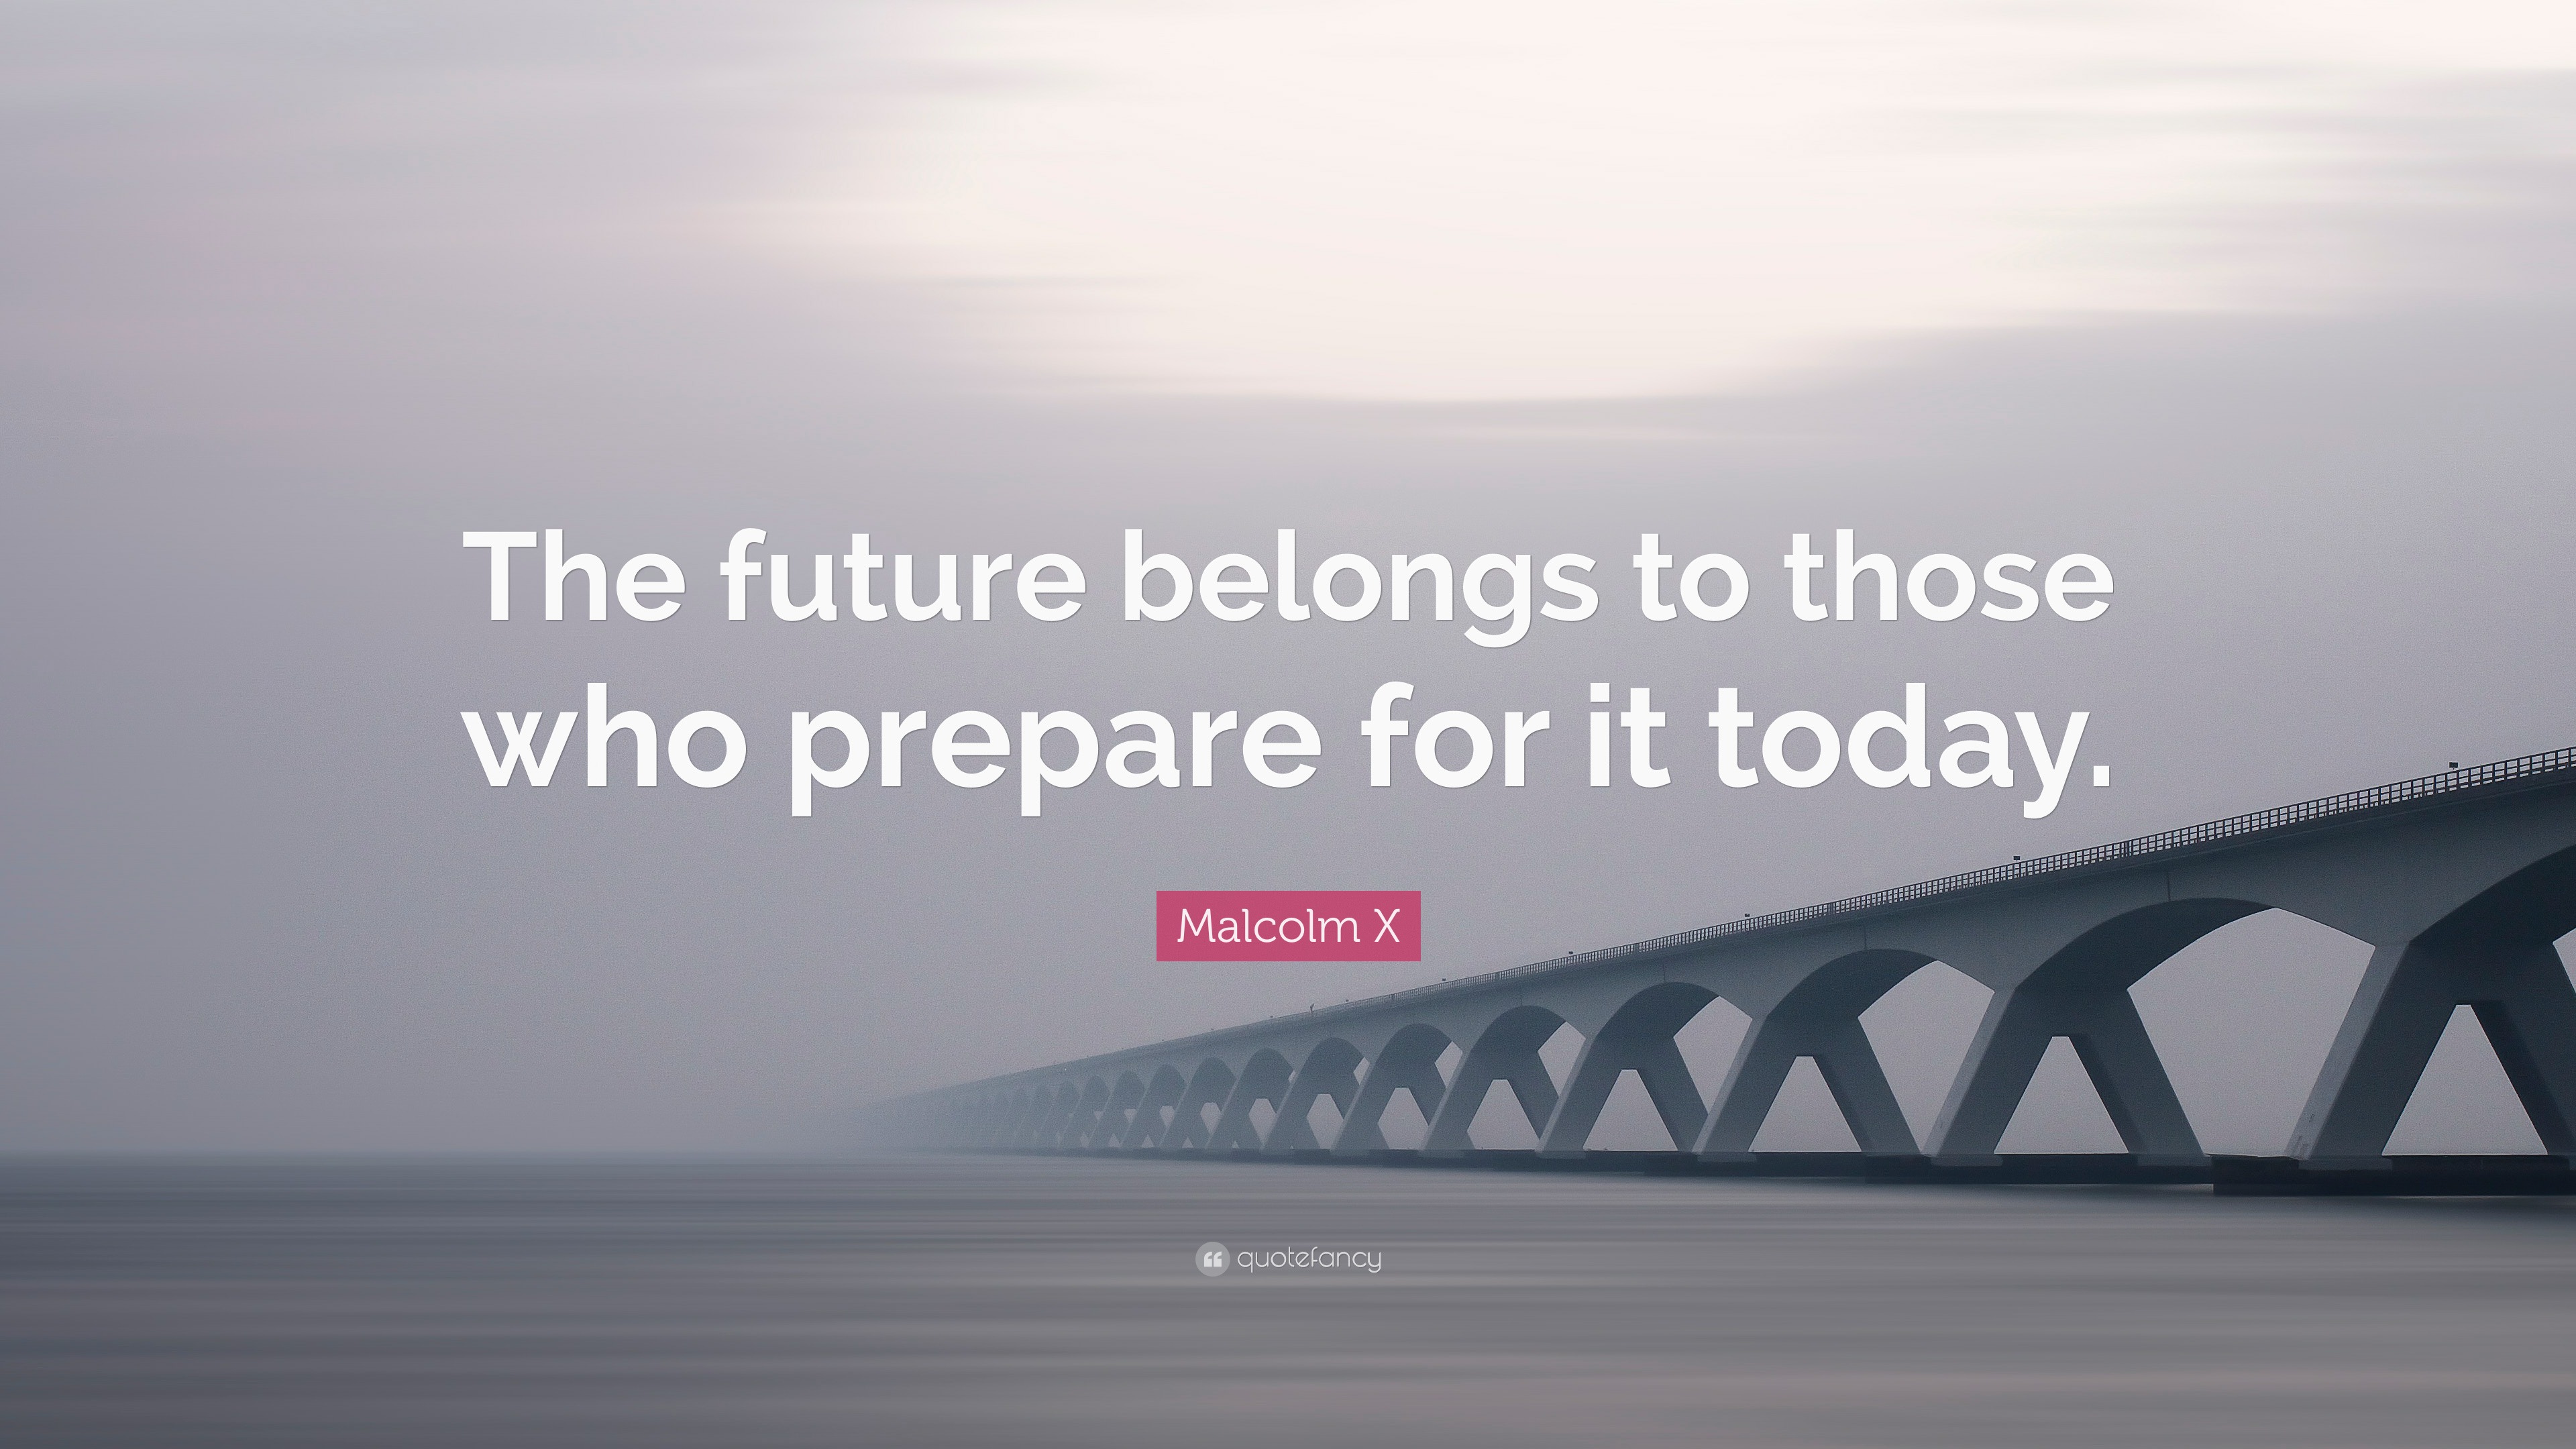 Malcolm X Quote: “The future belongs to those who prepare for it today.”